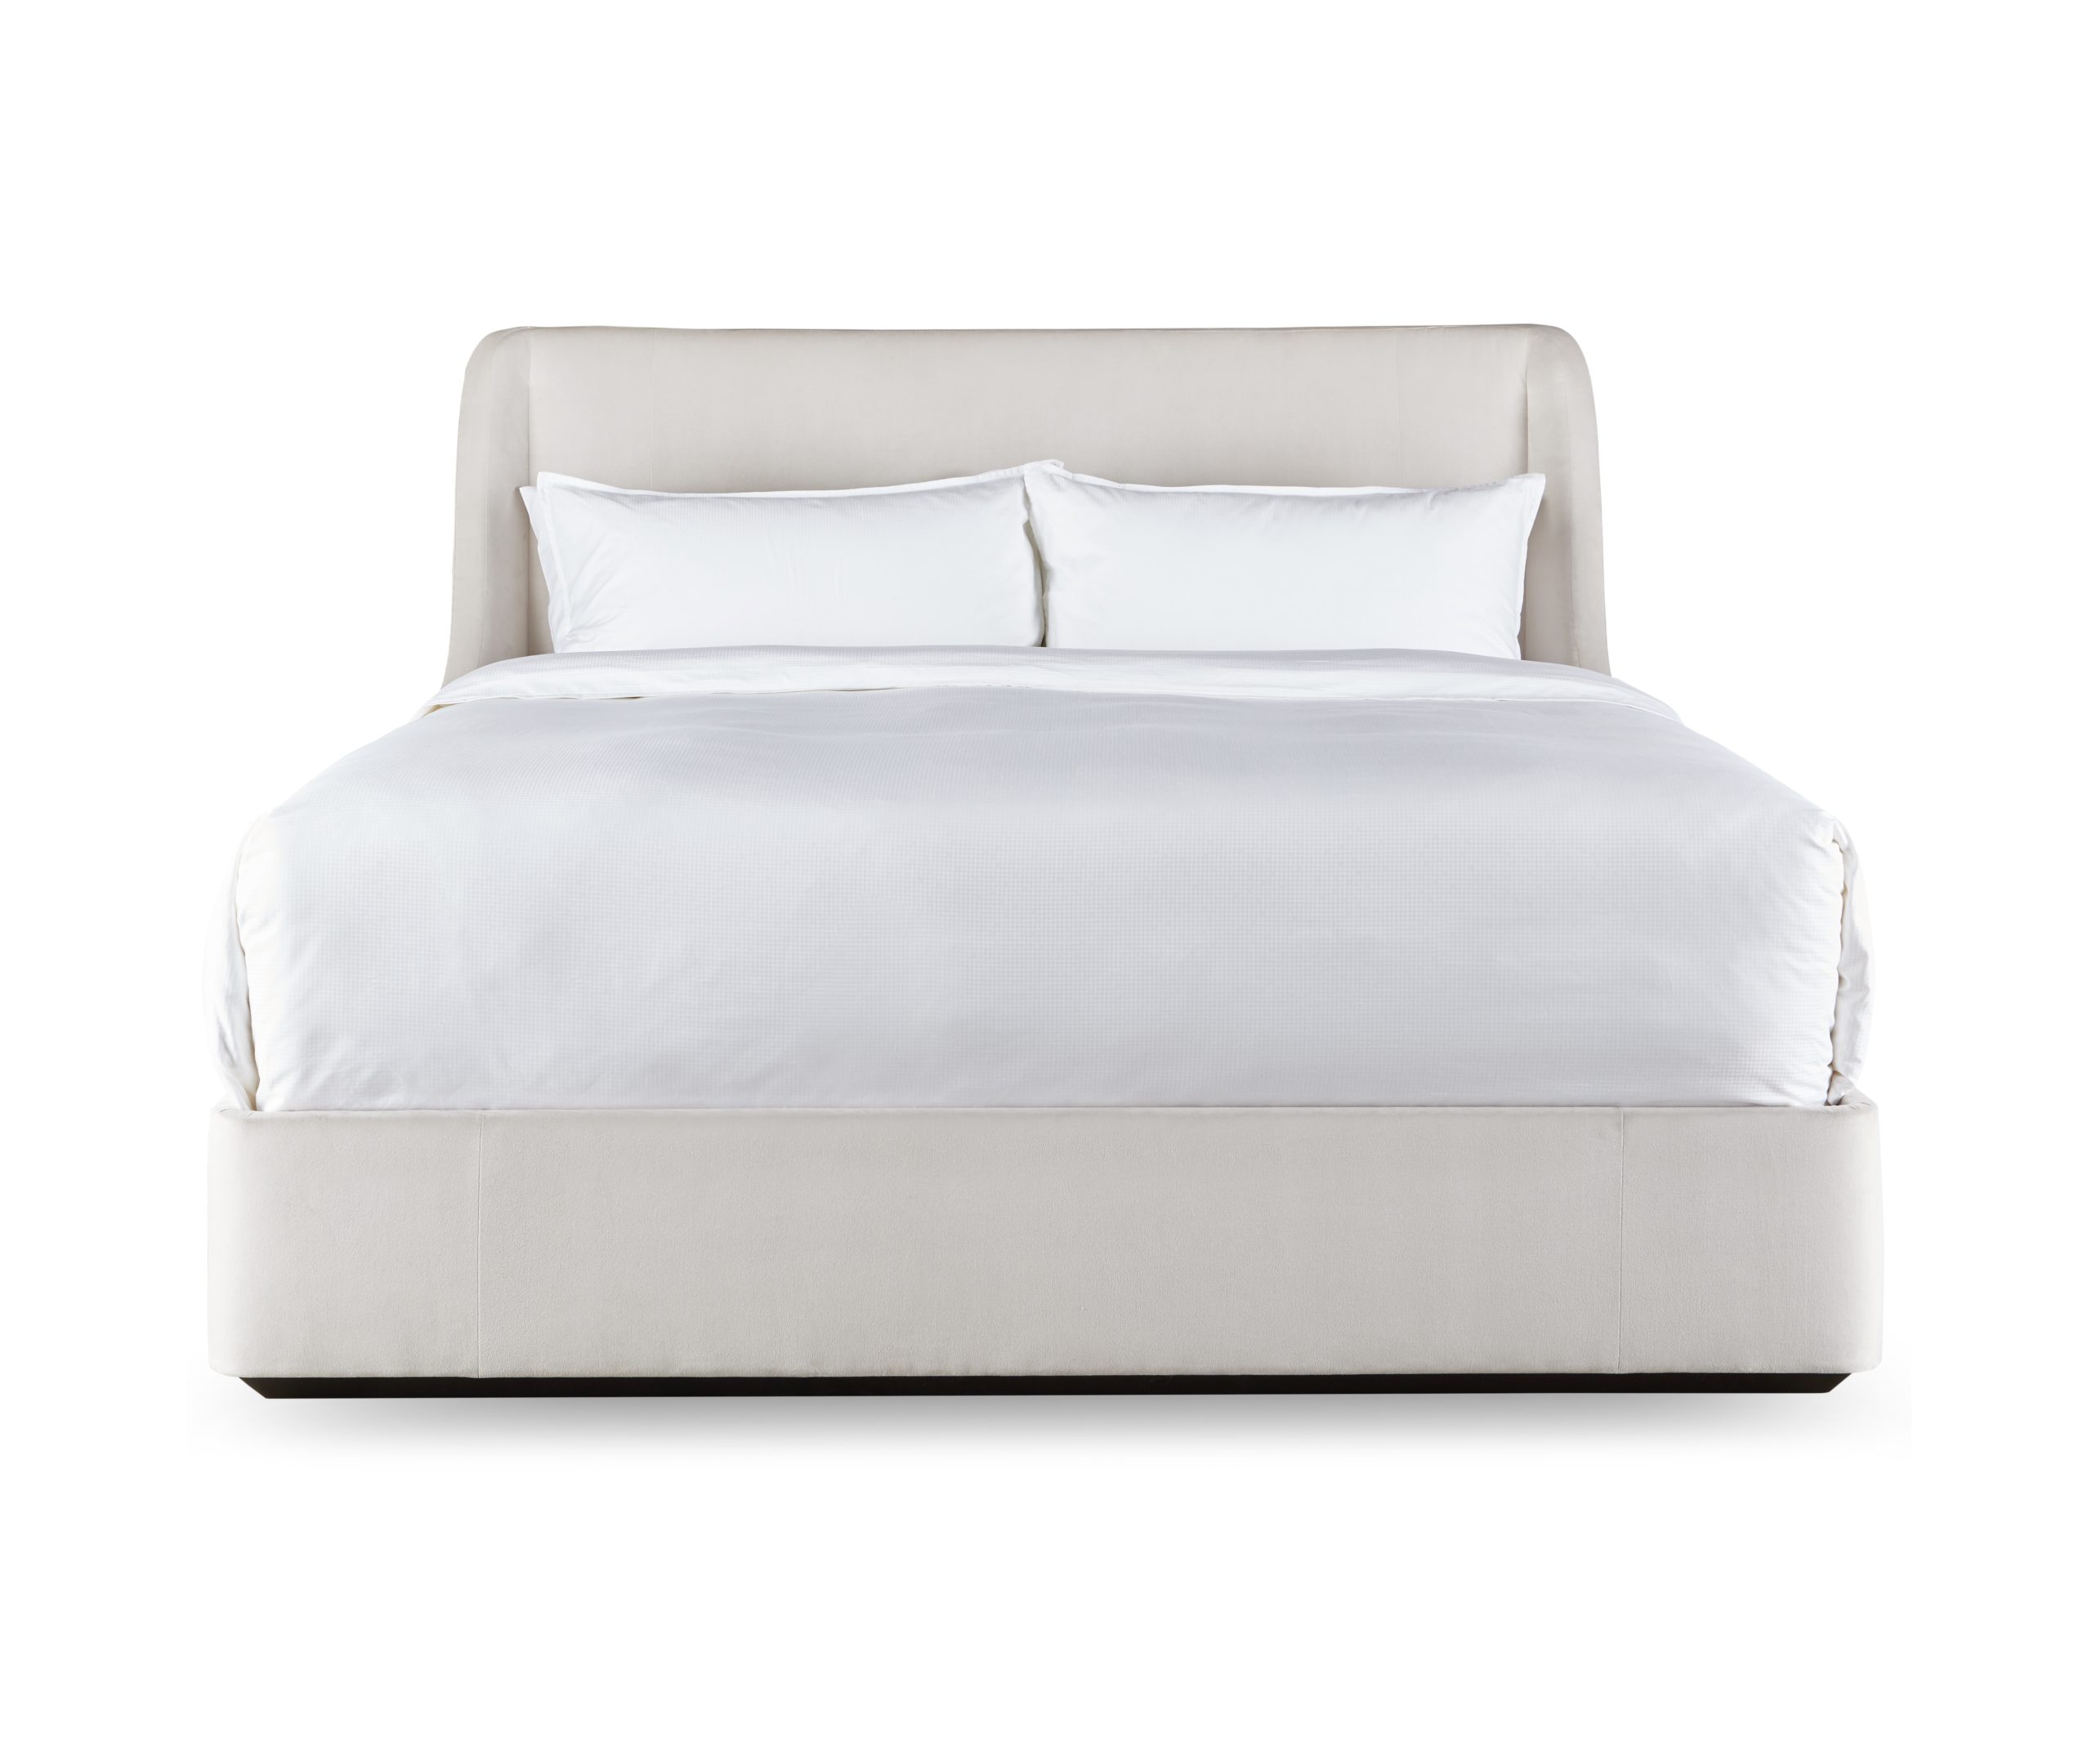 Baker_products_WNWN_casanova_bed_BAA3020_FRONT-scaled-2